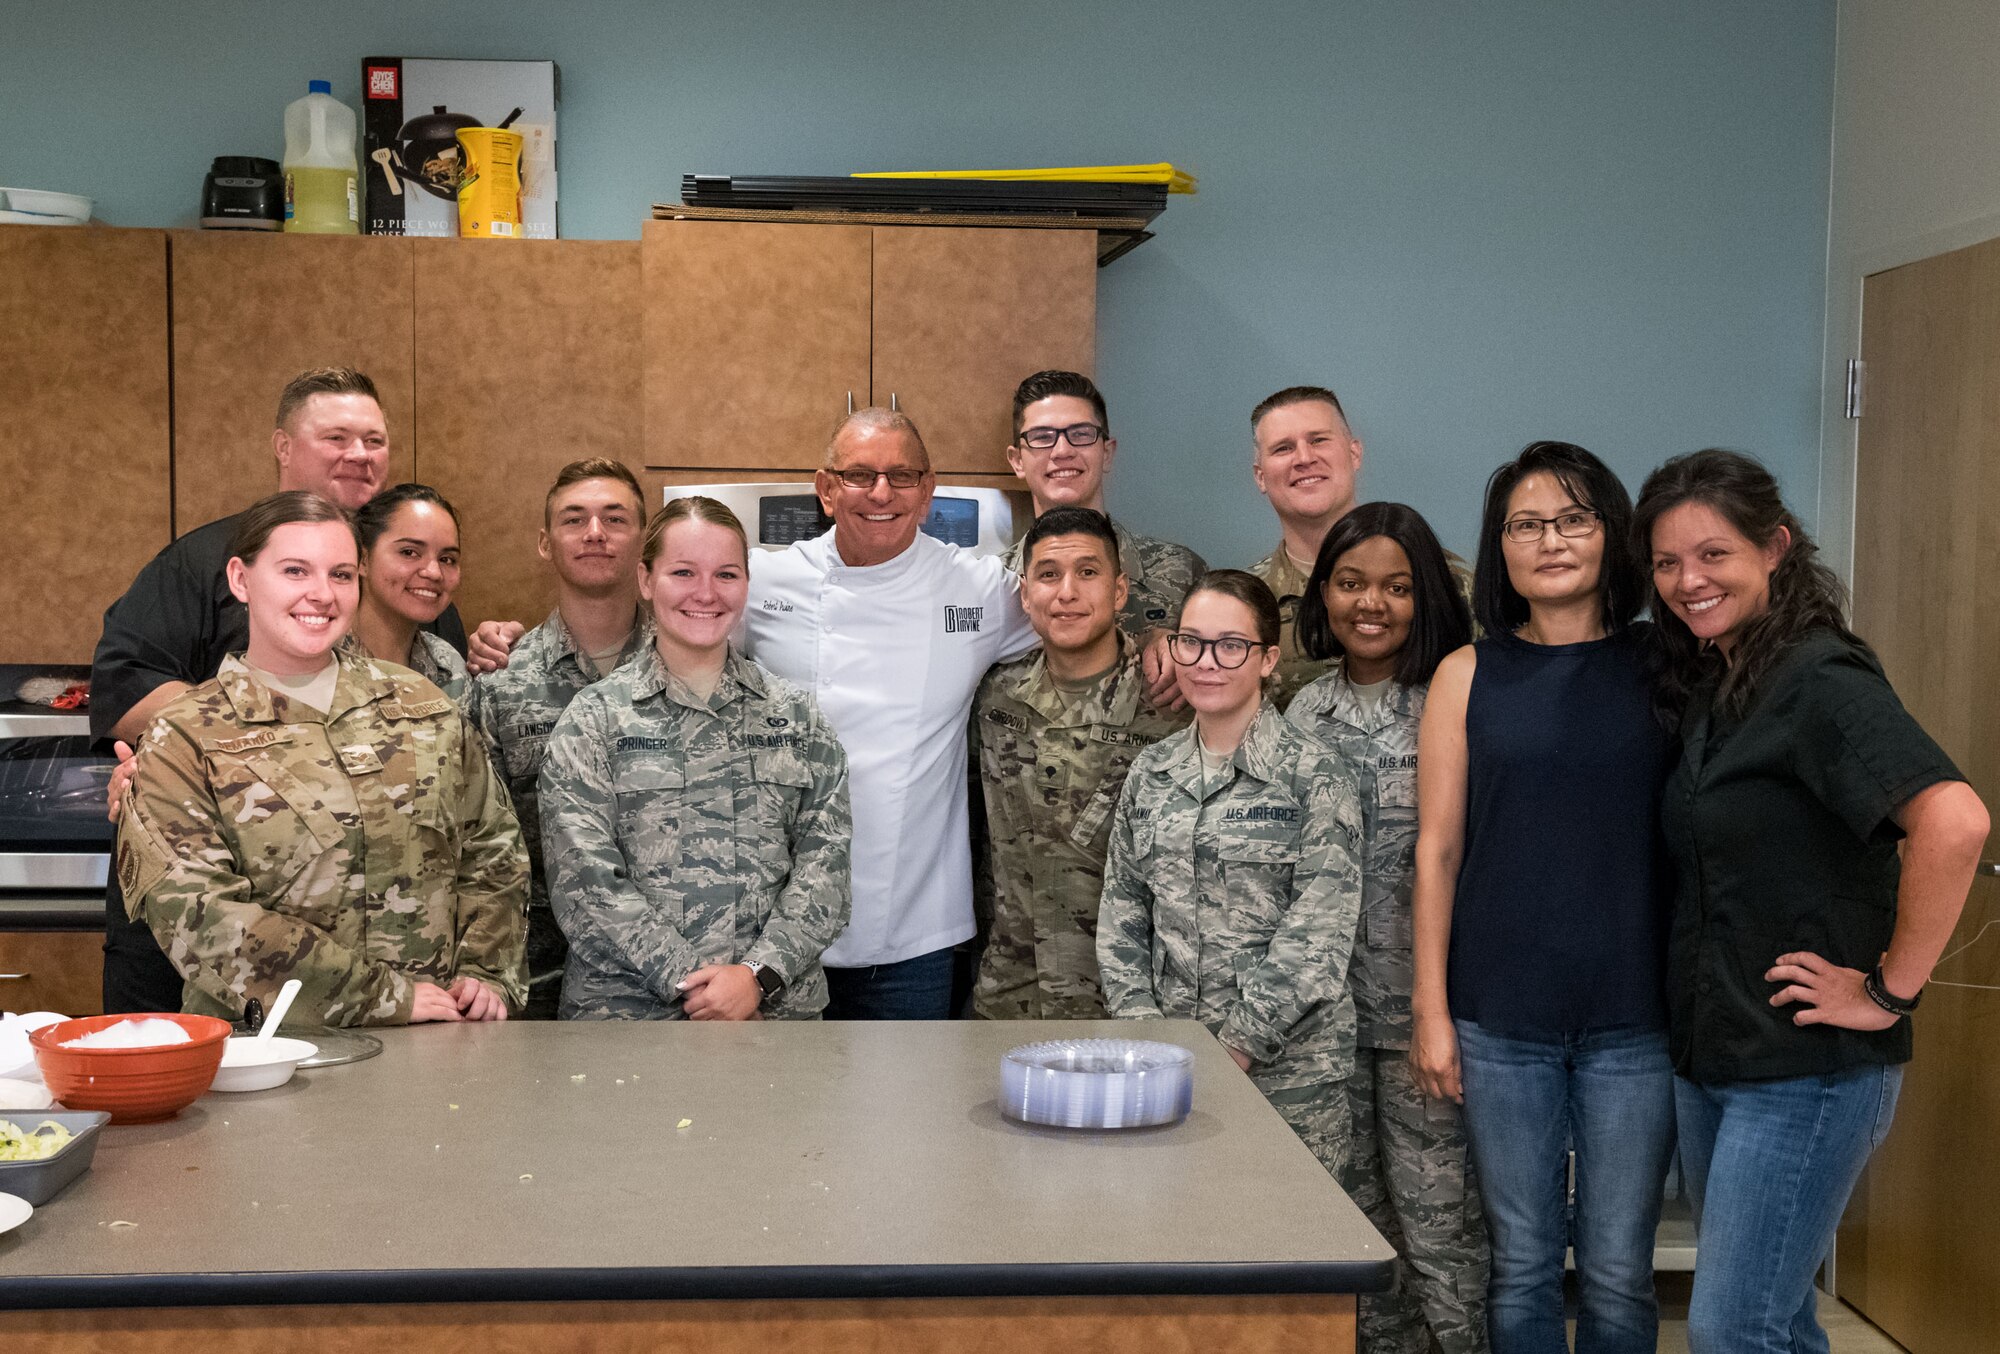 Chef Robert Irvine and his corporate chef, Shane Cash, along with Dorm to Gourm students pose for a photo, Aug. 27, 2019, at the Fitness Center on Dover Air Force Base, Del. Irvine taught Team Dover members how to make Cuban-Style Stewed Chicken Ropa Vieja Street Tacos and Rad Na Thai Chicken Salad. (U.S. Air Force photo by Roland Balik)